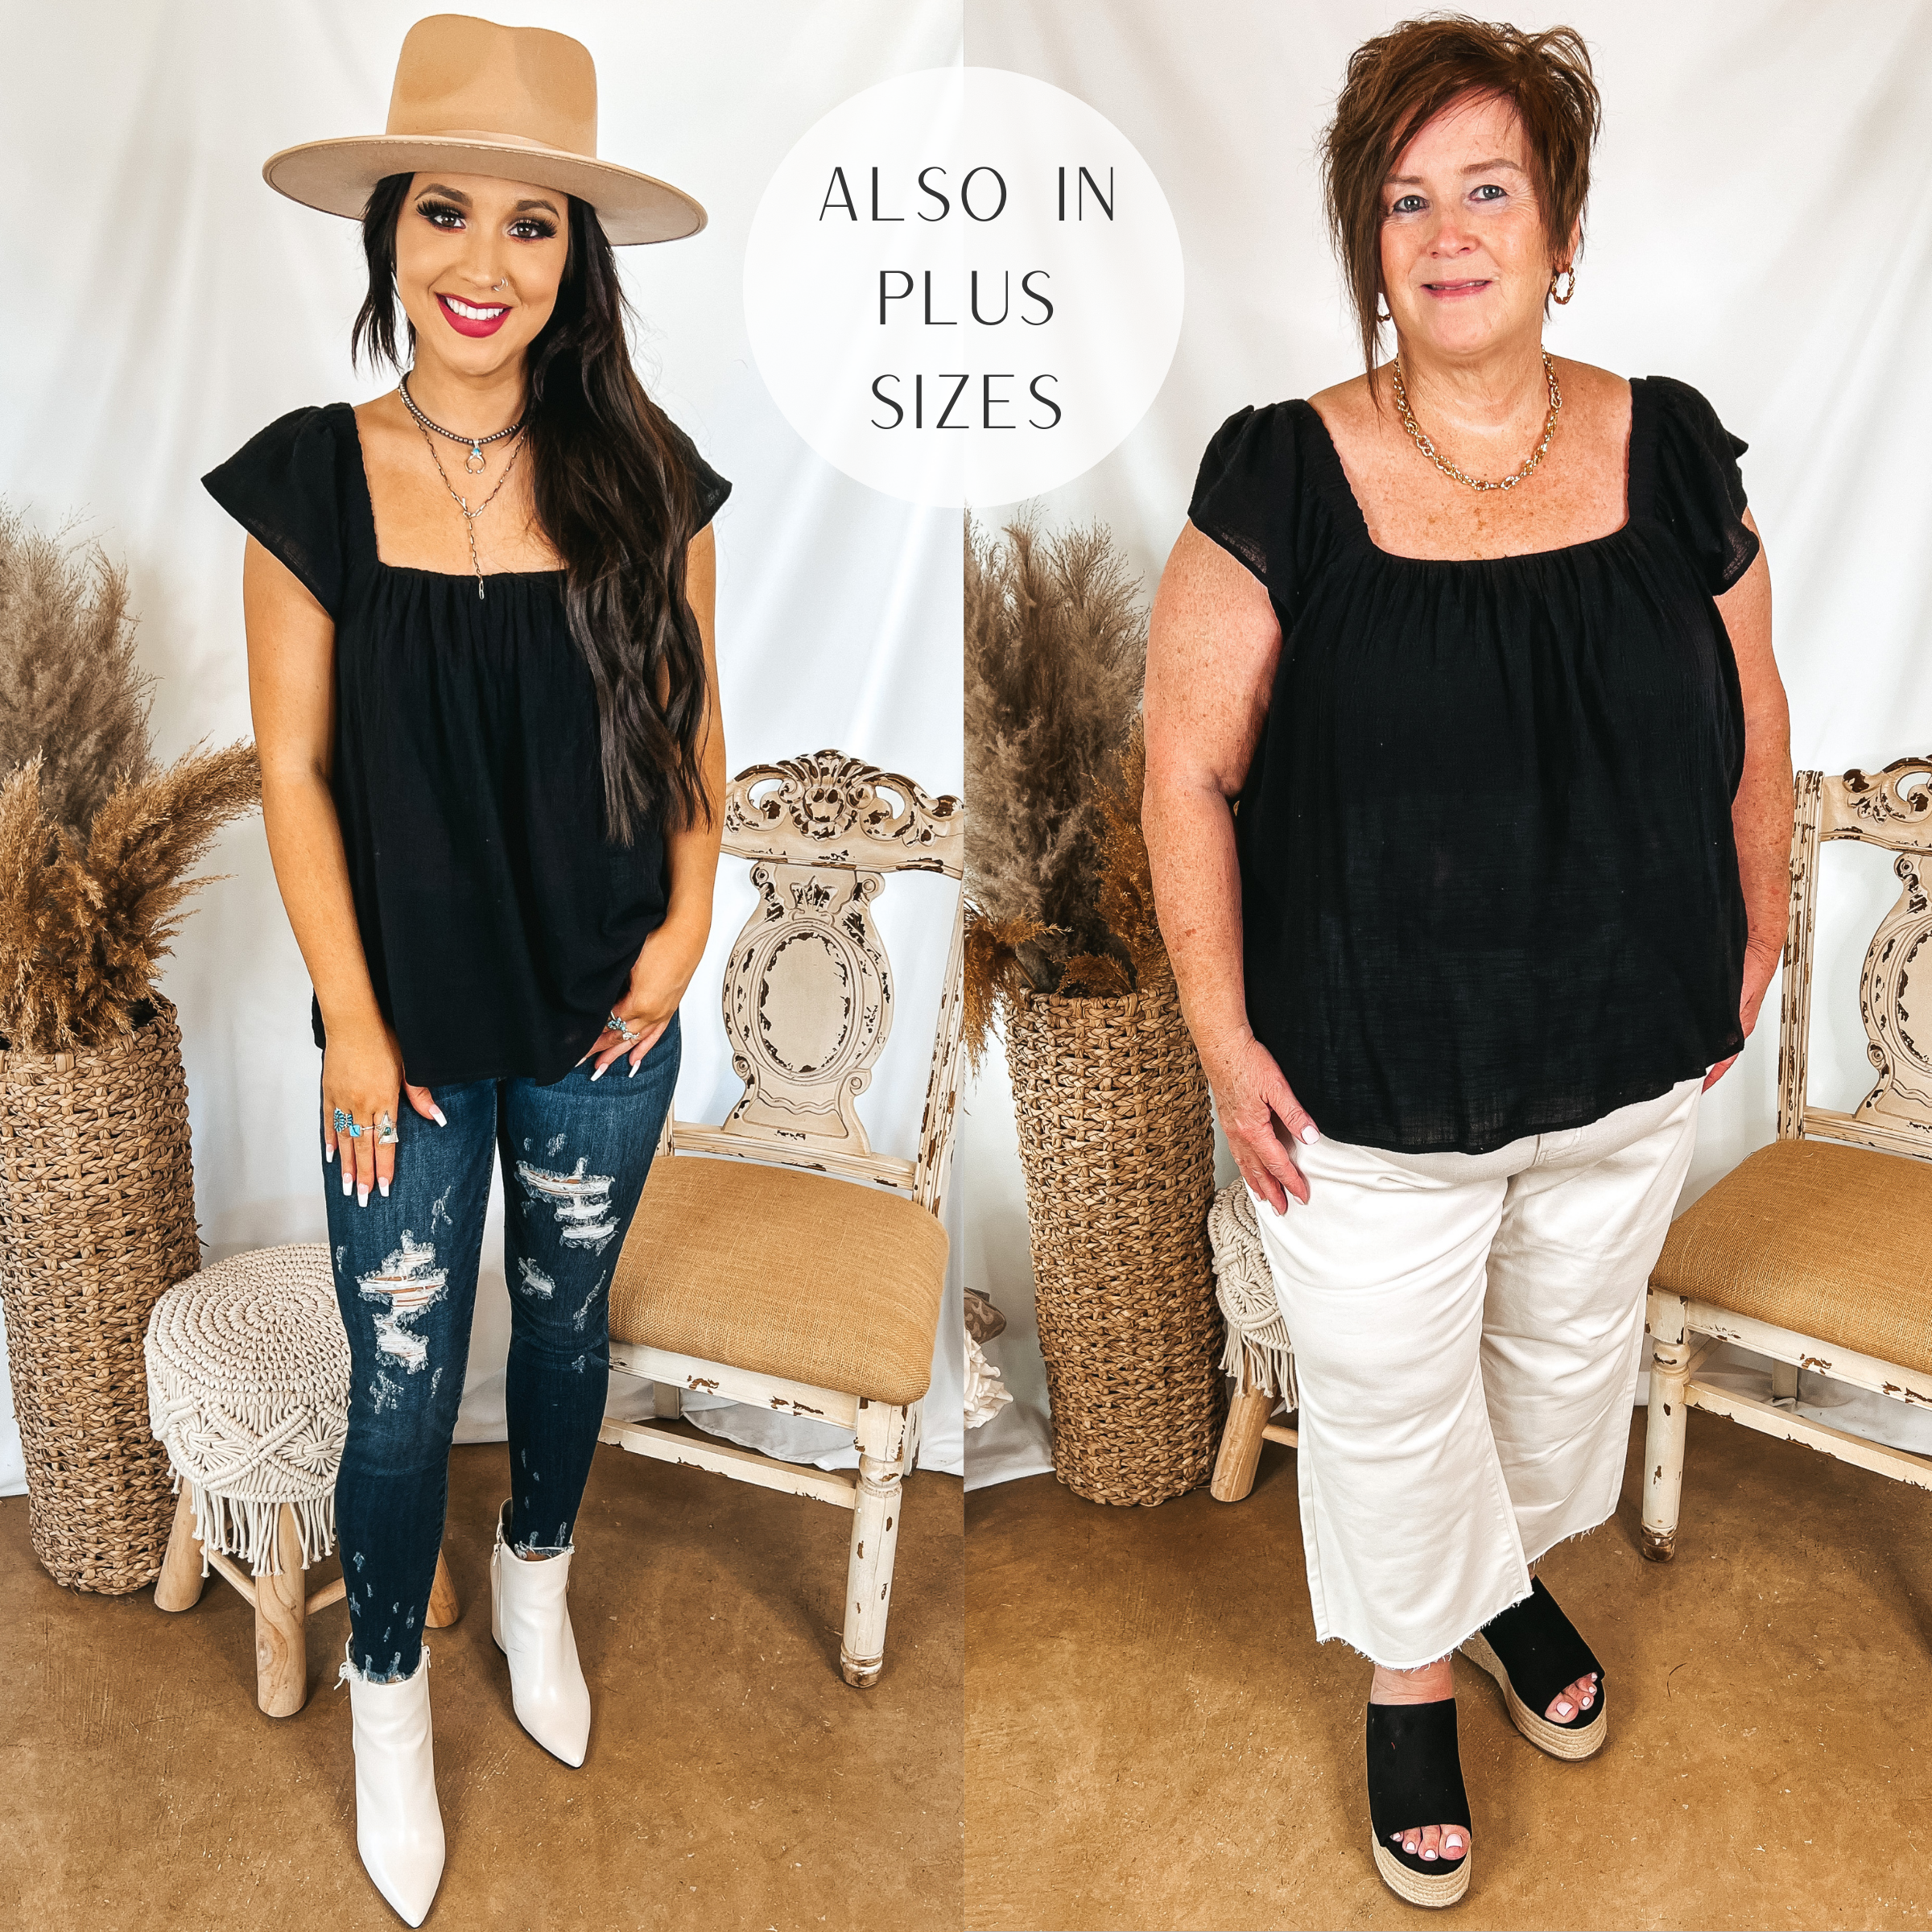 Models are wearing a black tank top that has a ruffle cap sleeve detail. Size small model has it paired with distressed skinny jeans, white booties, and a tan hat. Plus size model has it paired with white crop jeans, black wedges, and gold jewelry.